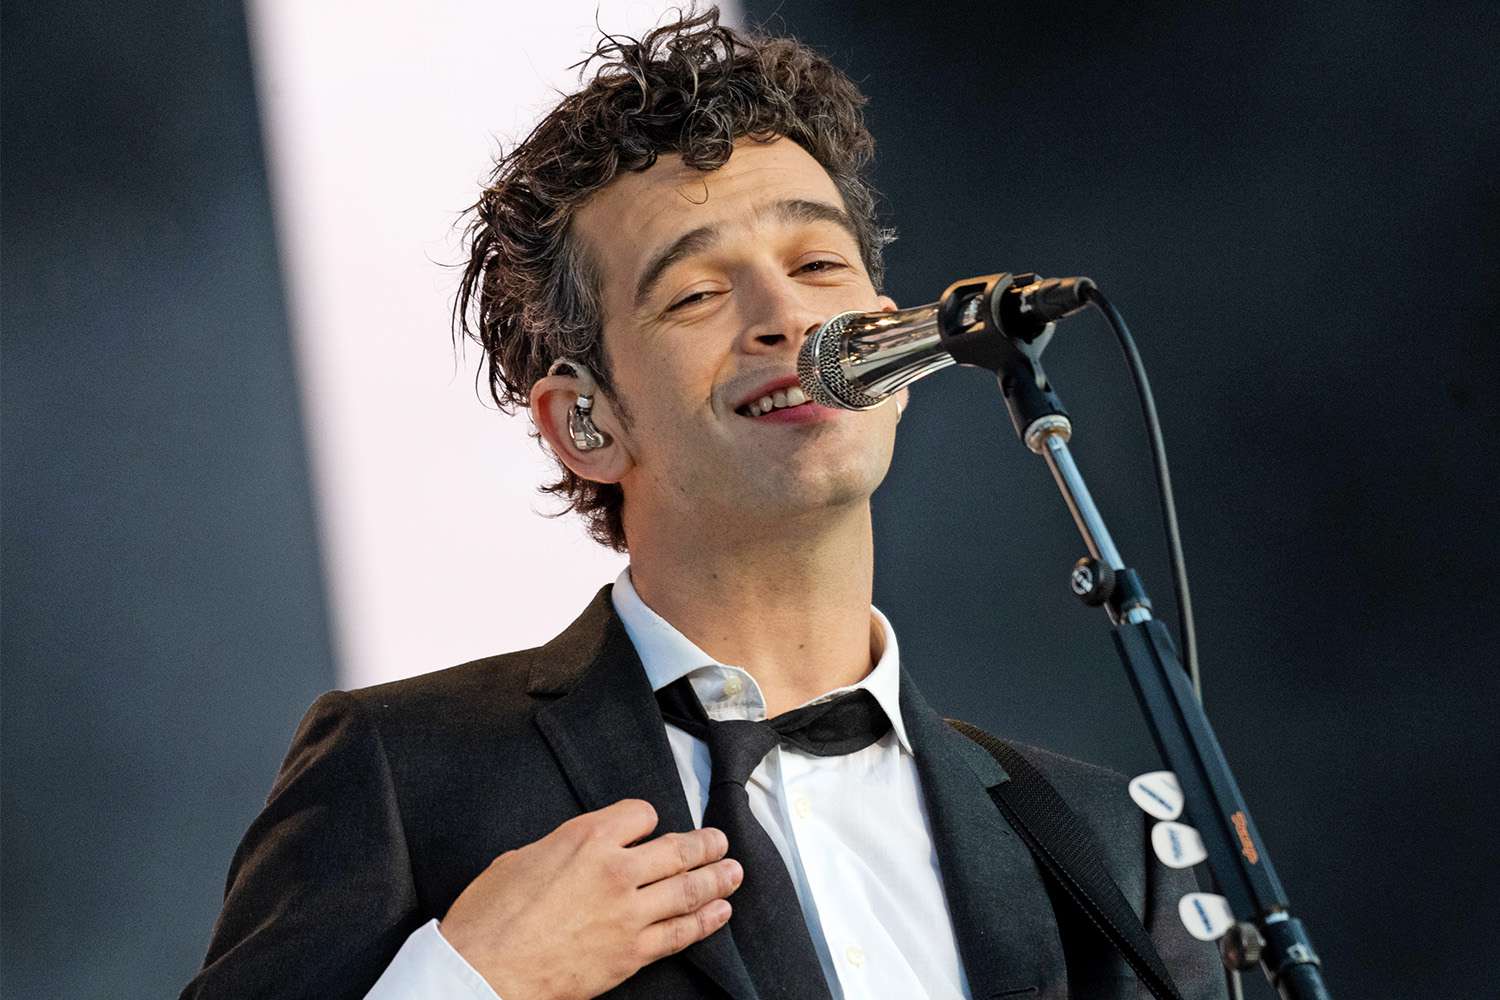 Matty Healy Biography: Age, Net Worth, Songs, Wiki, Girlfriend, Instagram, Pictures